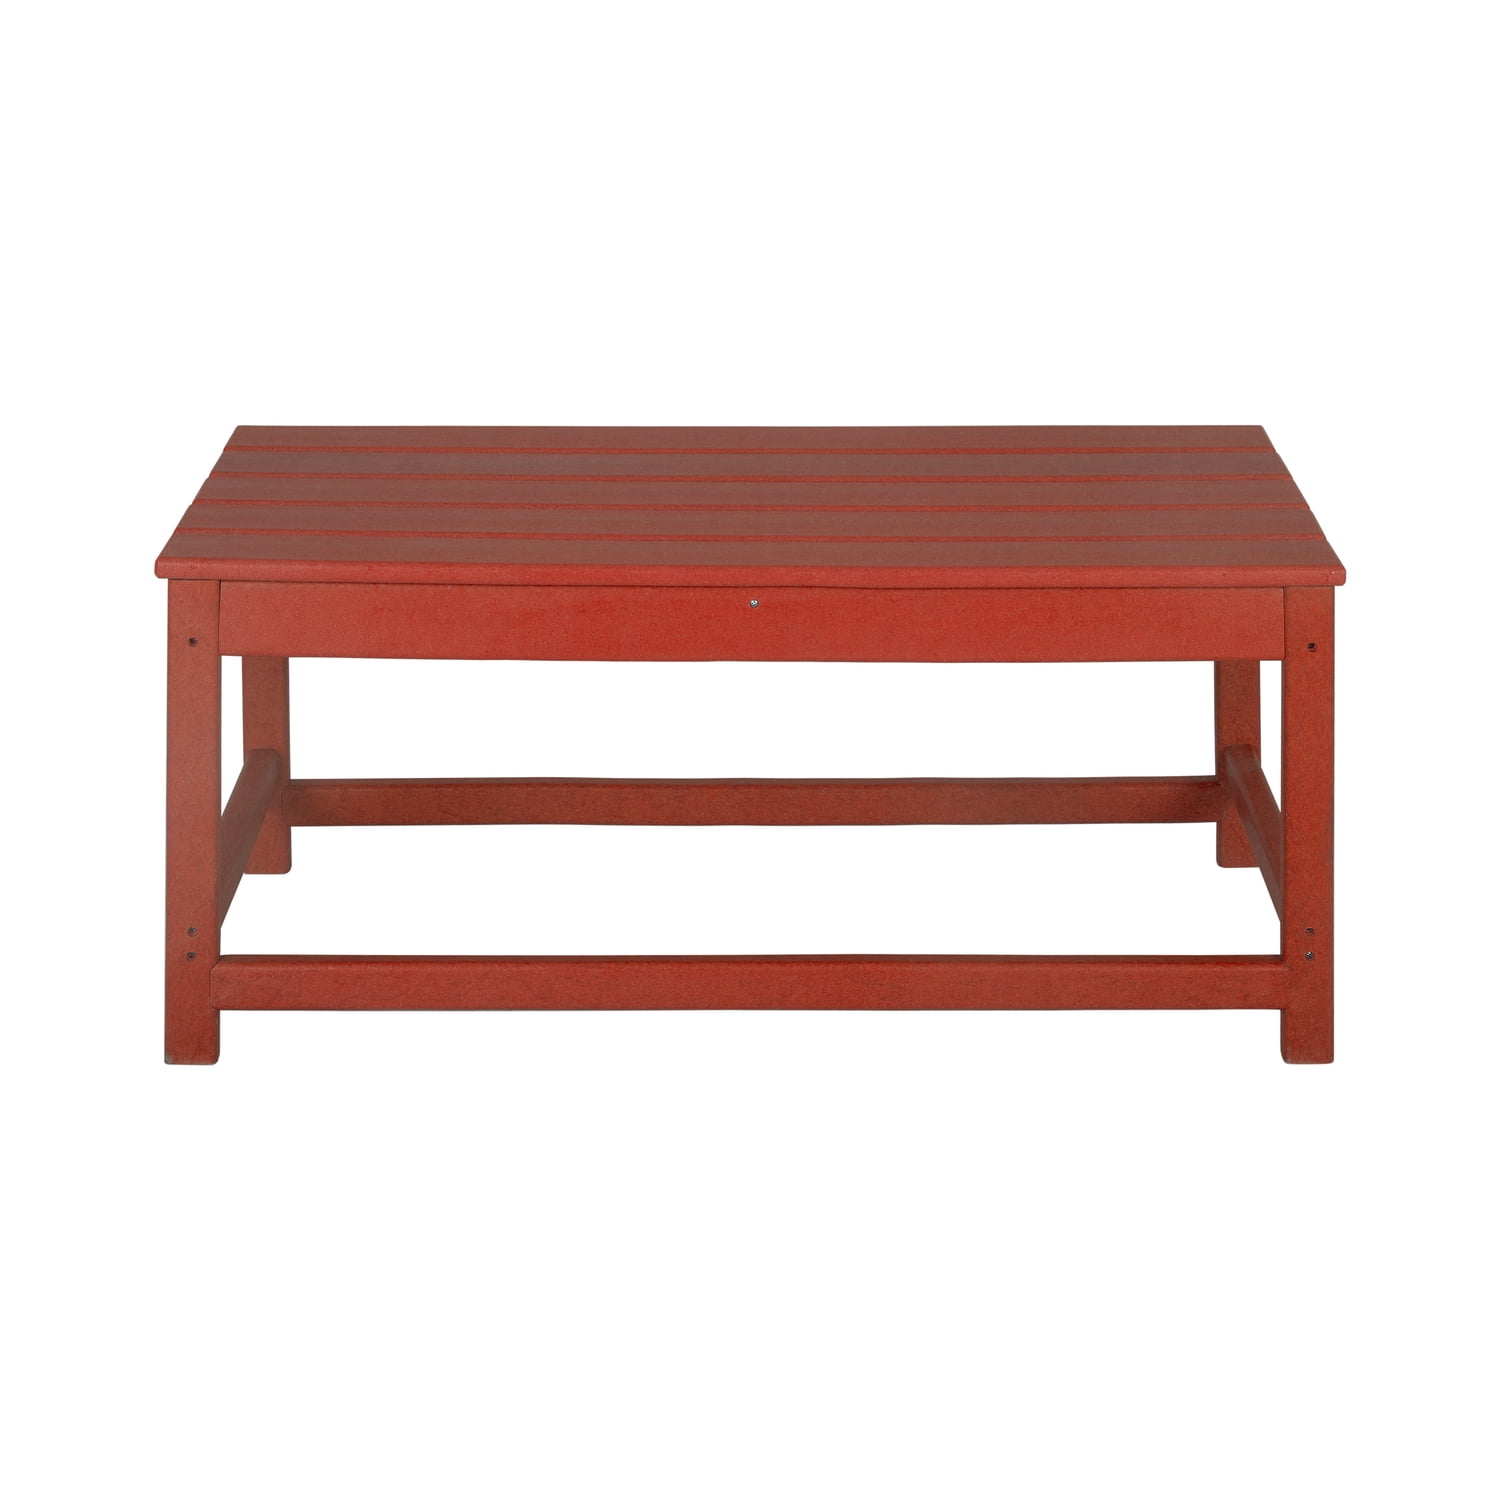 WO Outdoor Patio Classic Adirondack Coffee Table, Red